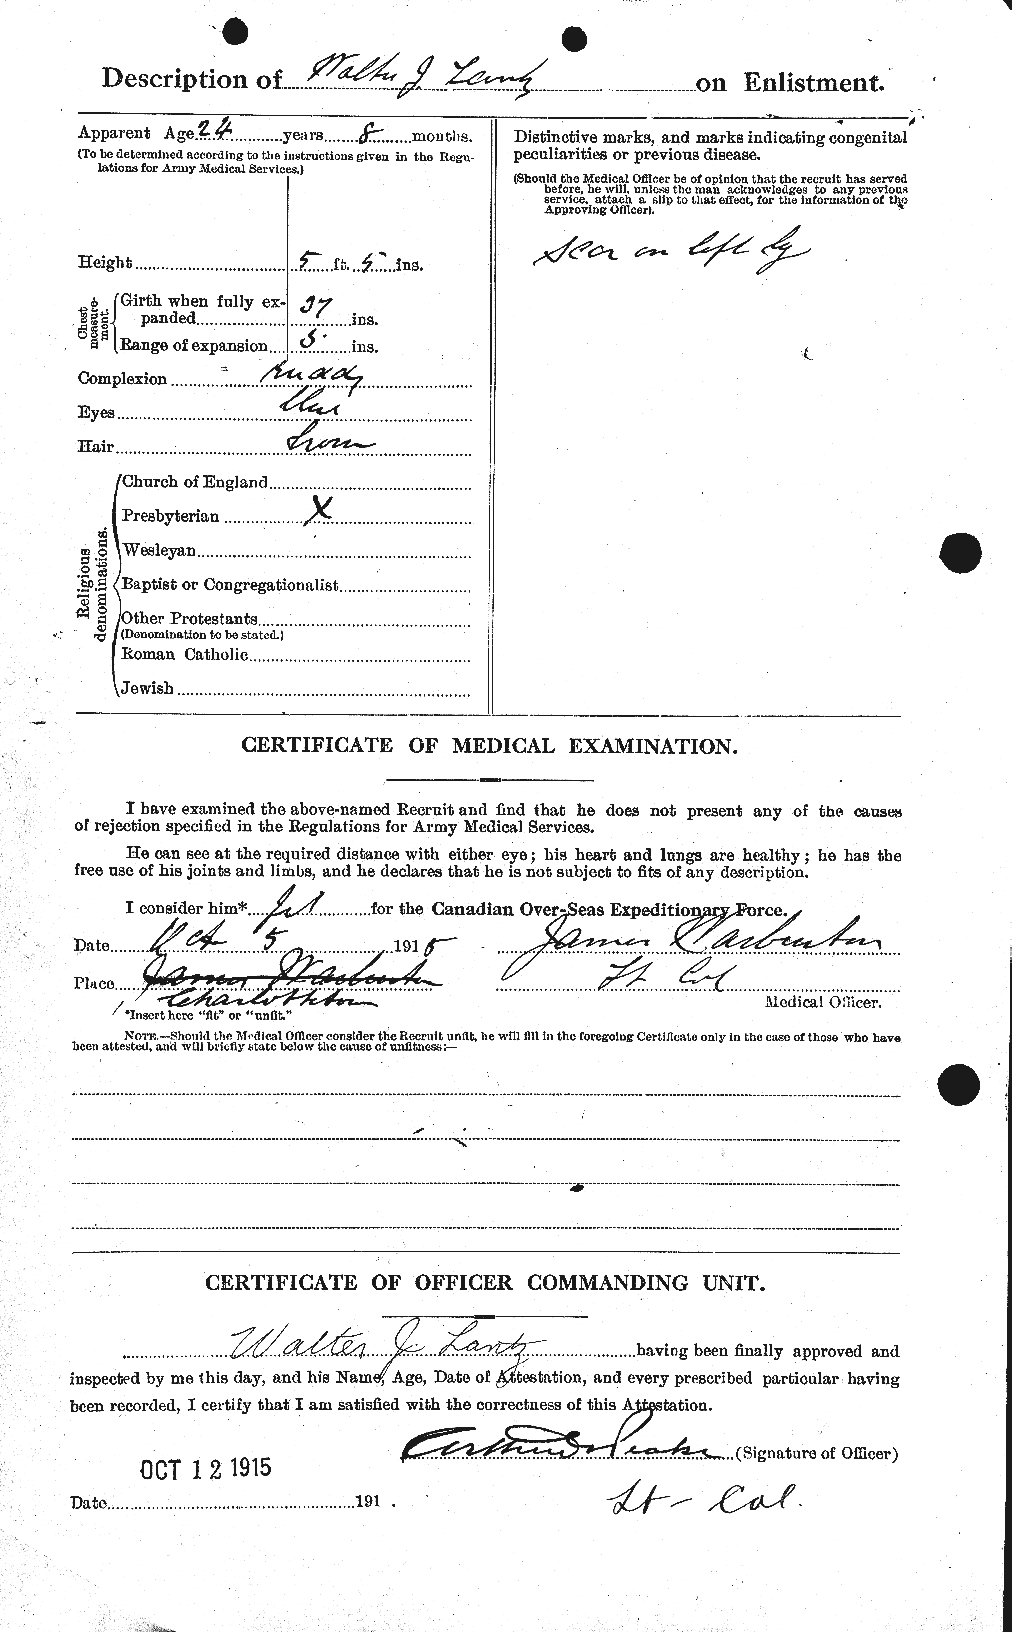 Personnel Records of the First World War - CEF 449681b